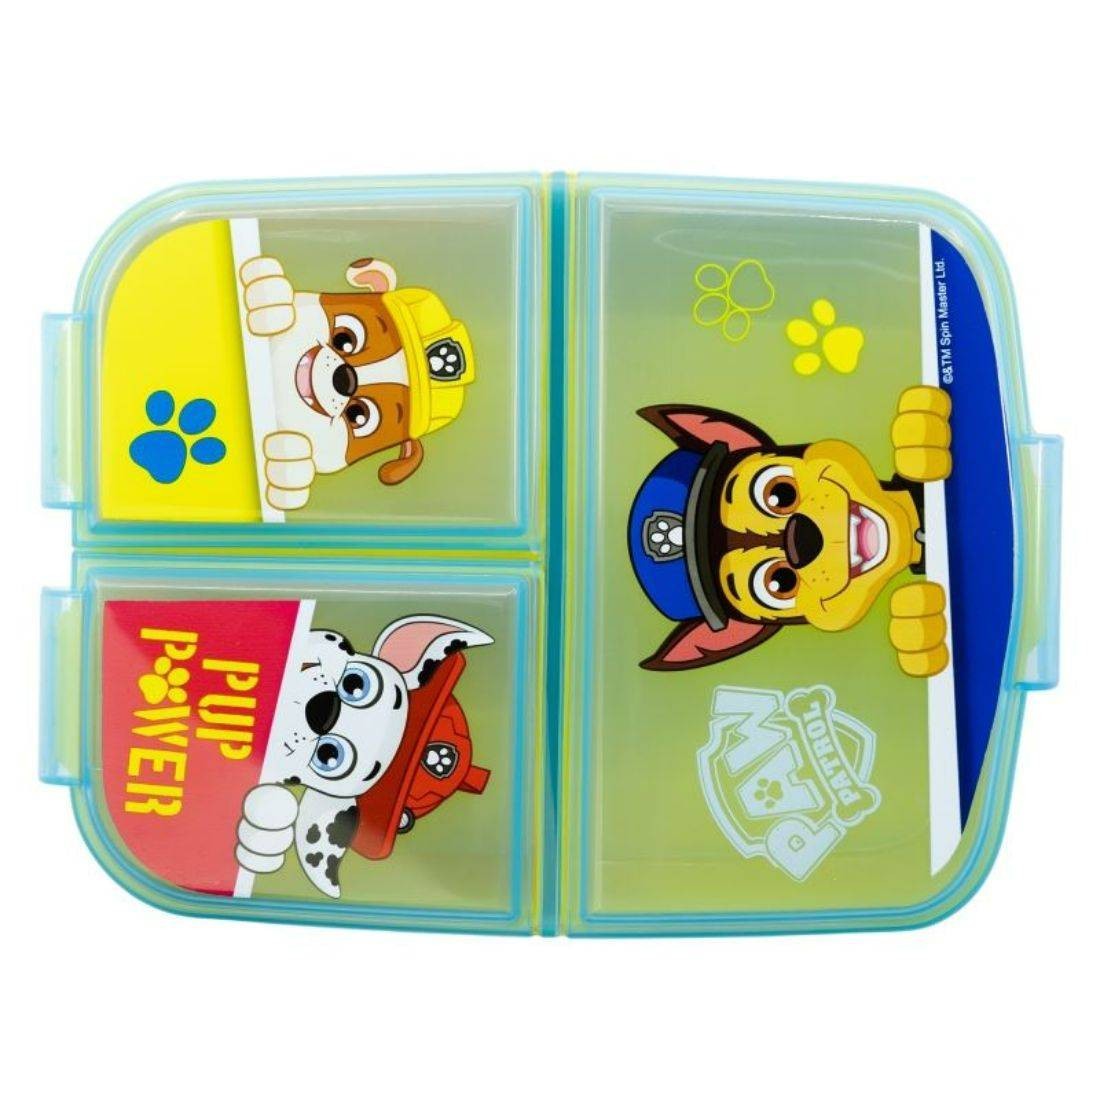 https://theoutfit.me/81416-thickbox_default/stor-multi-compartment-sandwich-box---paw-patrol-pup-power-stor-amman-8412497746200.jpg